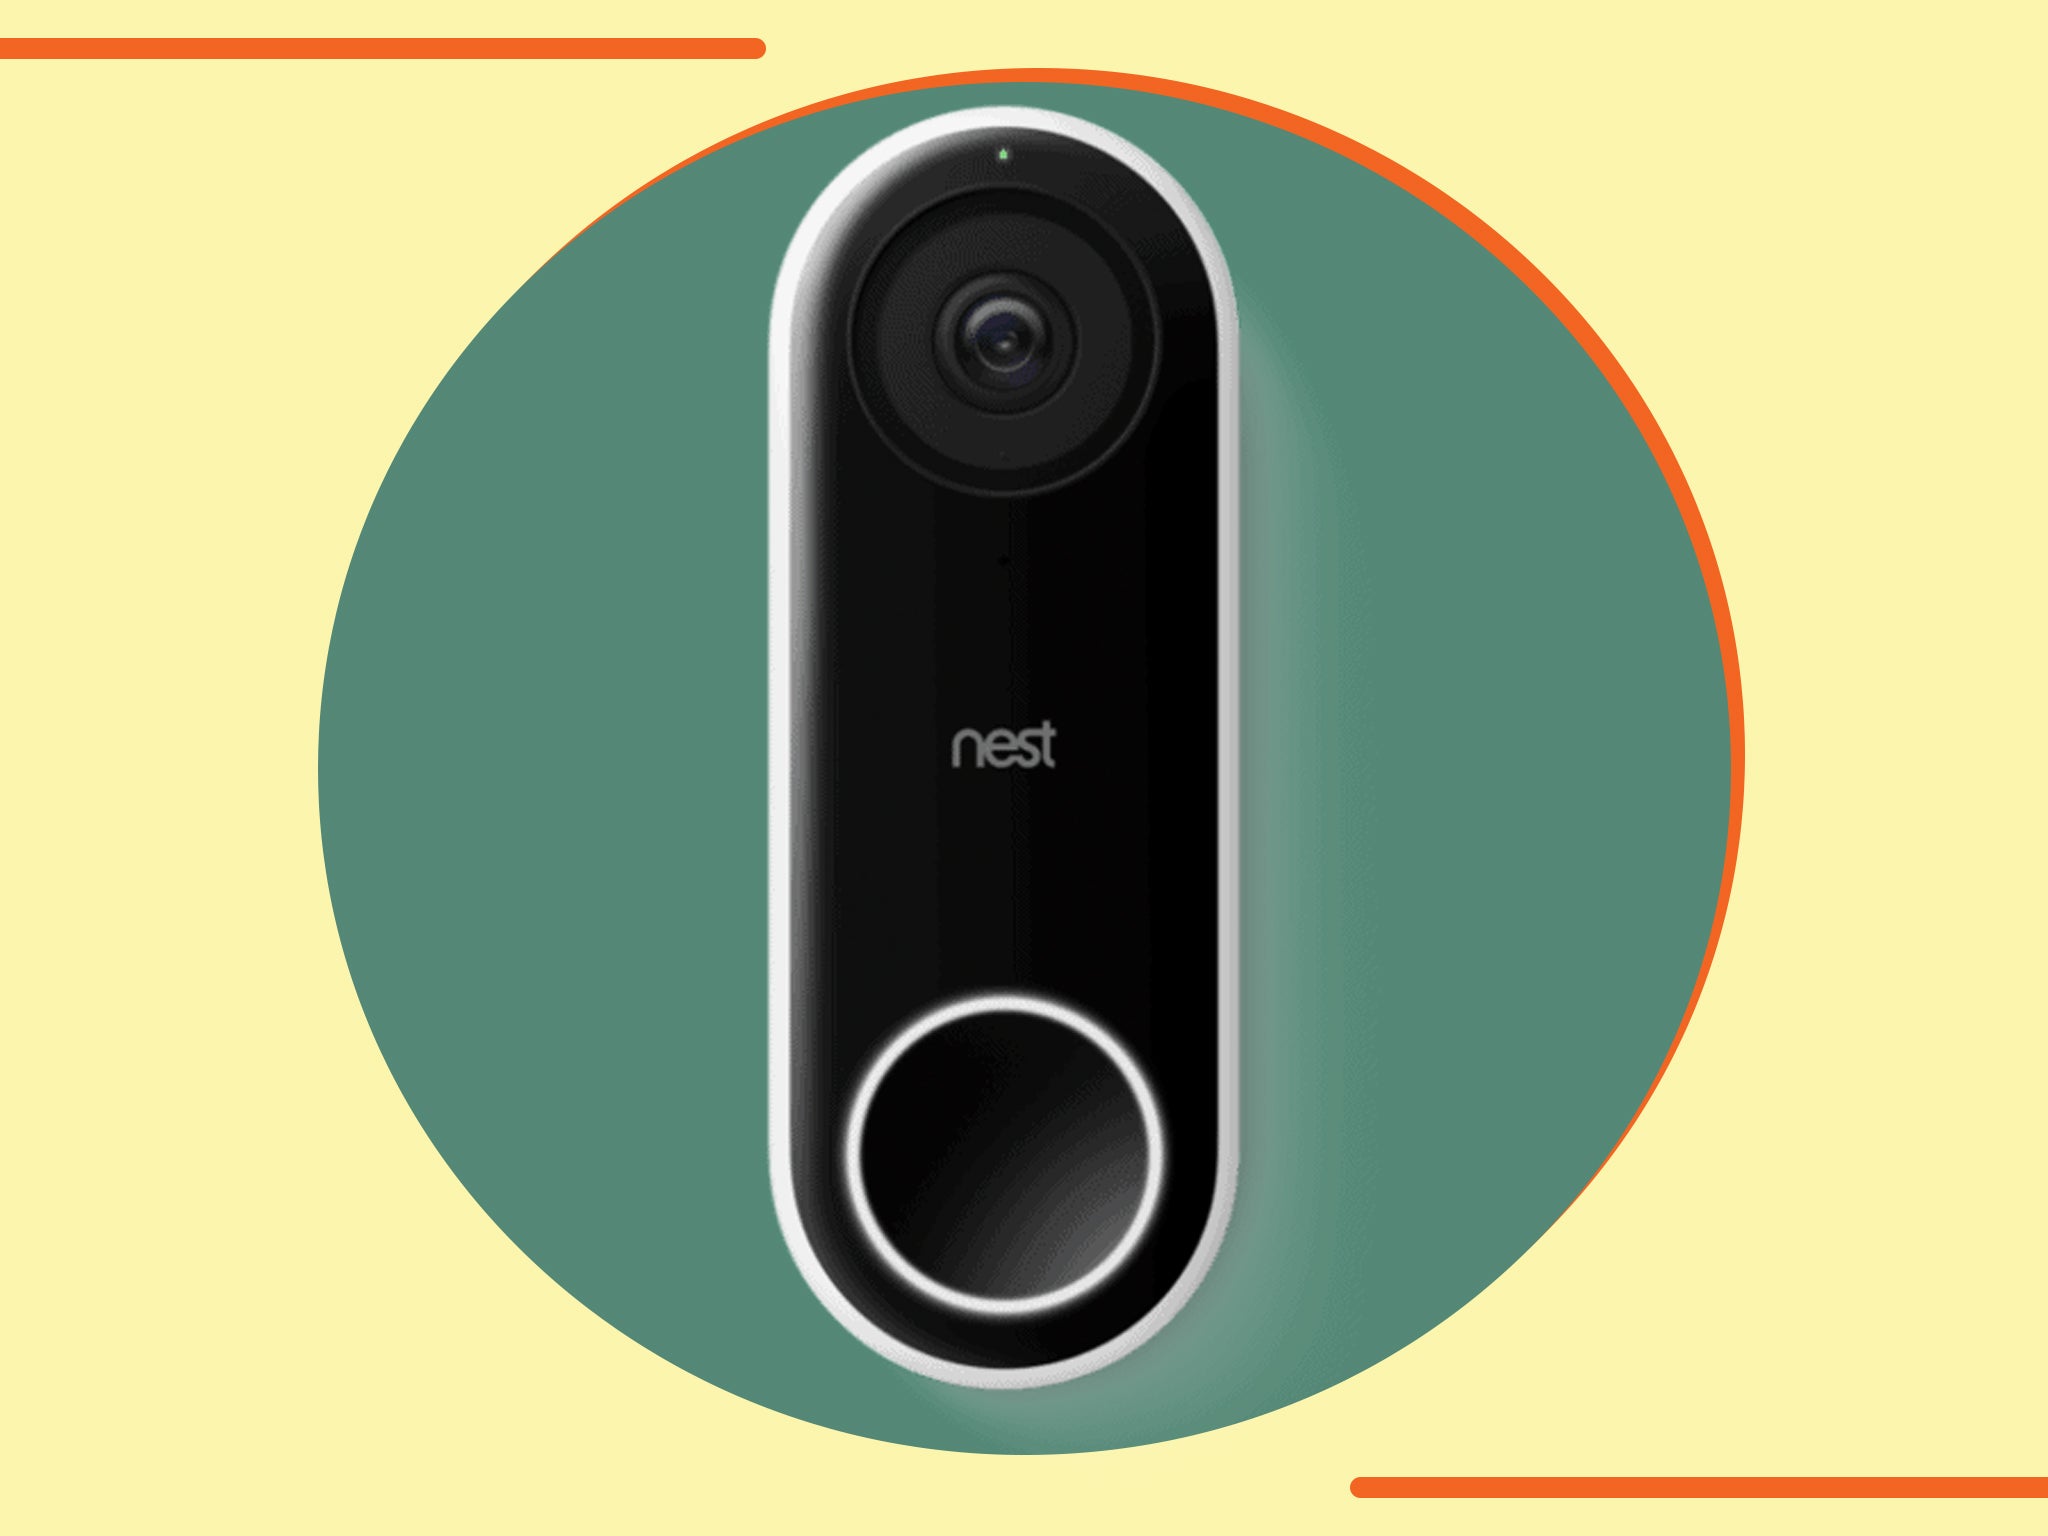 Google nest doorbell (wired) review: A discreet and stylish smart doorbell thrumming with security features